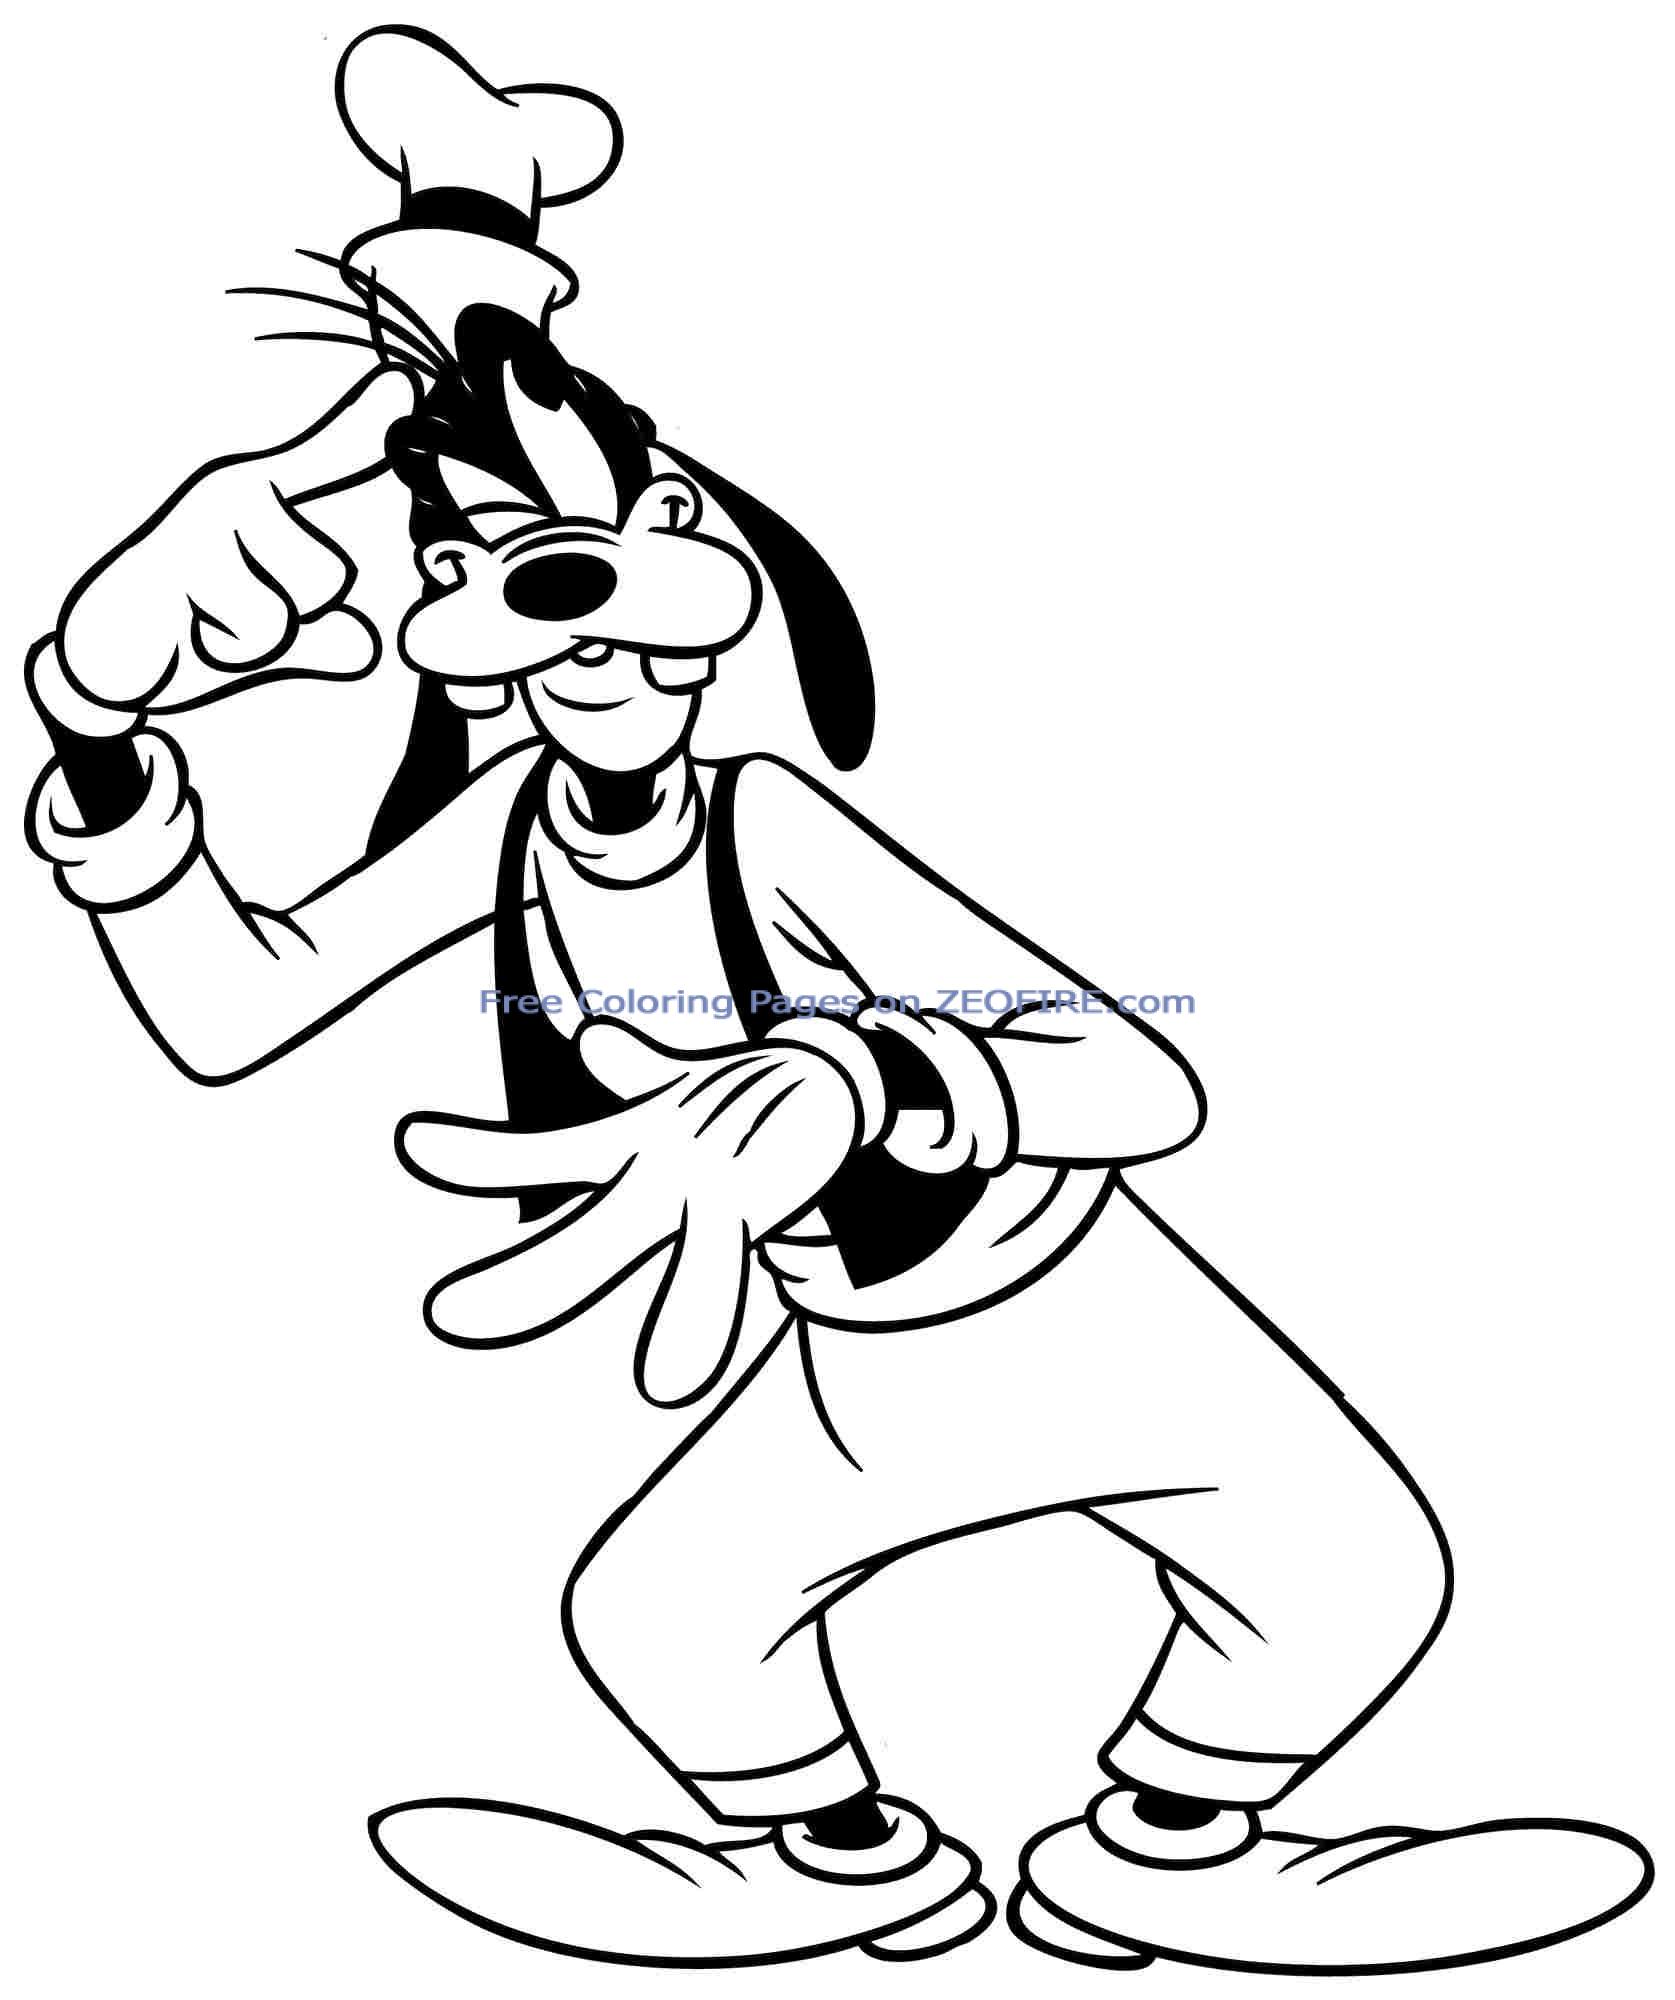 Goofy cartoon coloring pages download and print for free